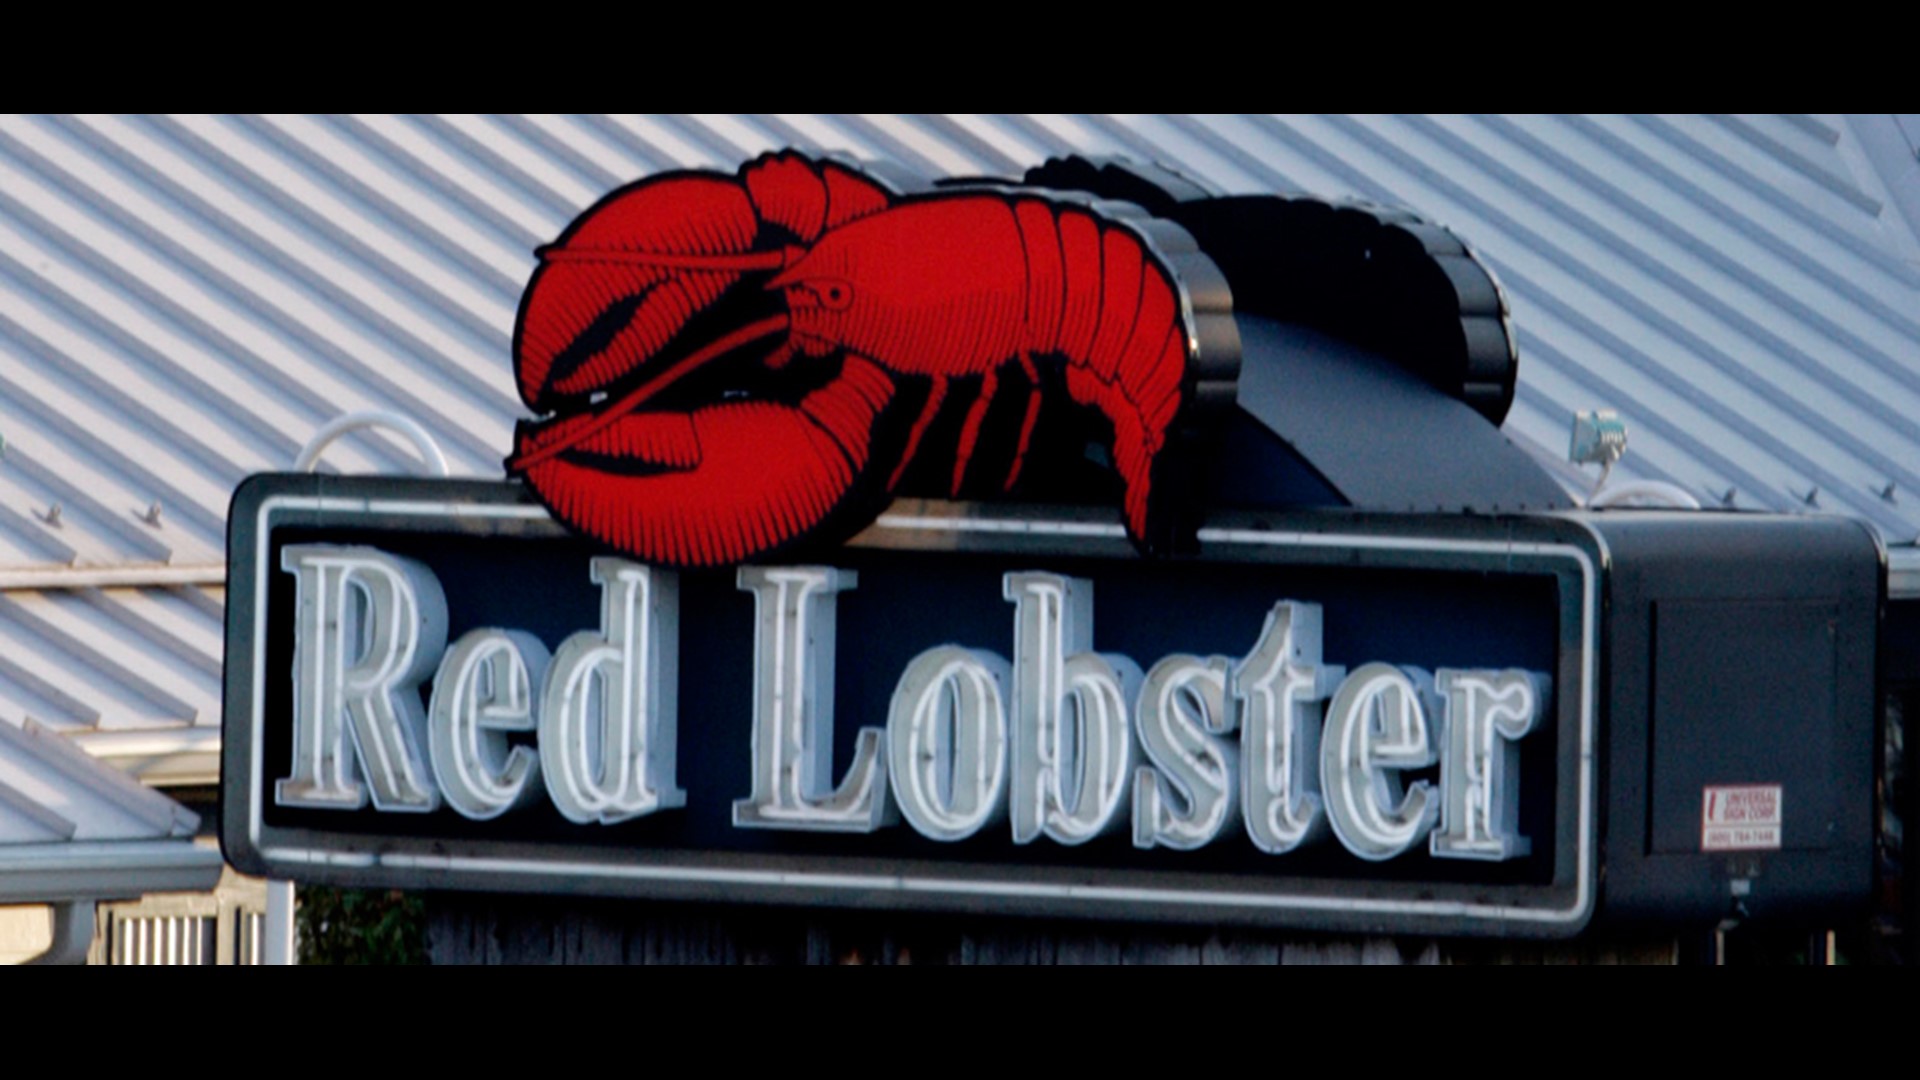 Red Lobster, which abruptly shut down more than 50 locations Monday, has yet to say anything pubicly about the closures.